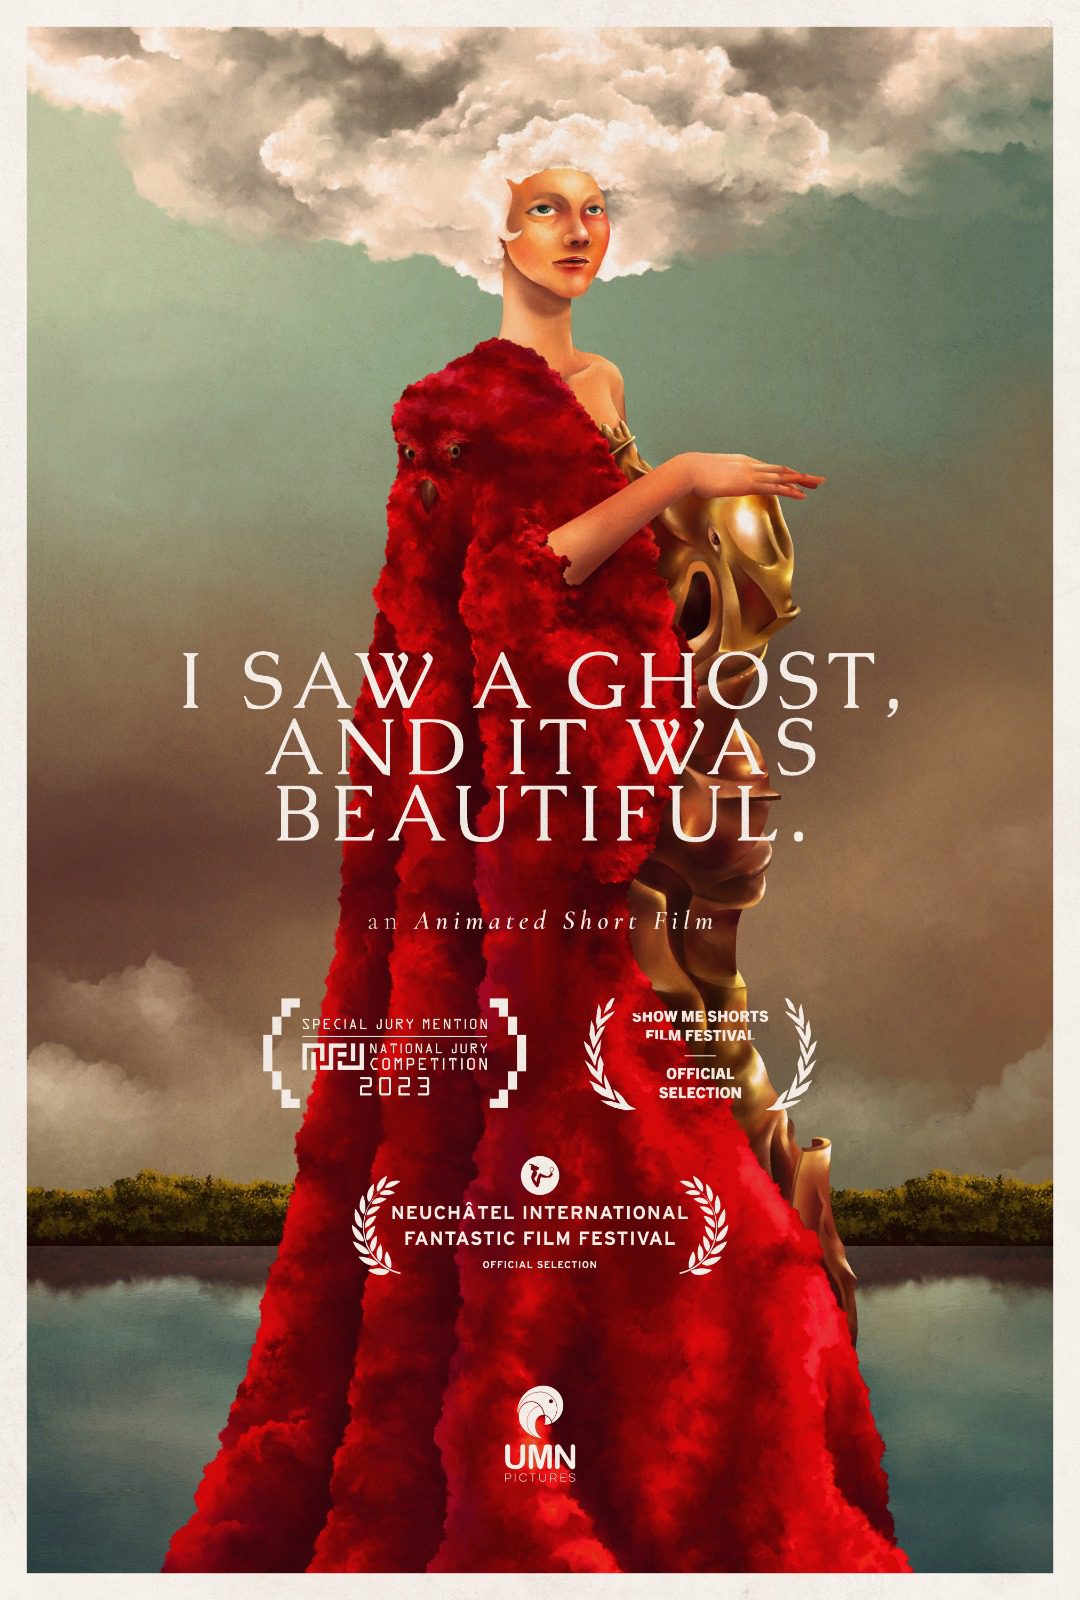 “I Saw A Ghost and It Was Beautiful” Film Successfully Nominated for an International Film Festival